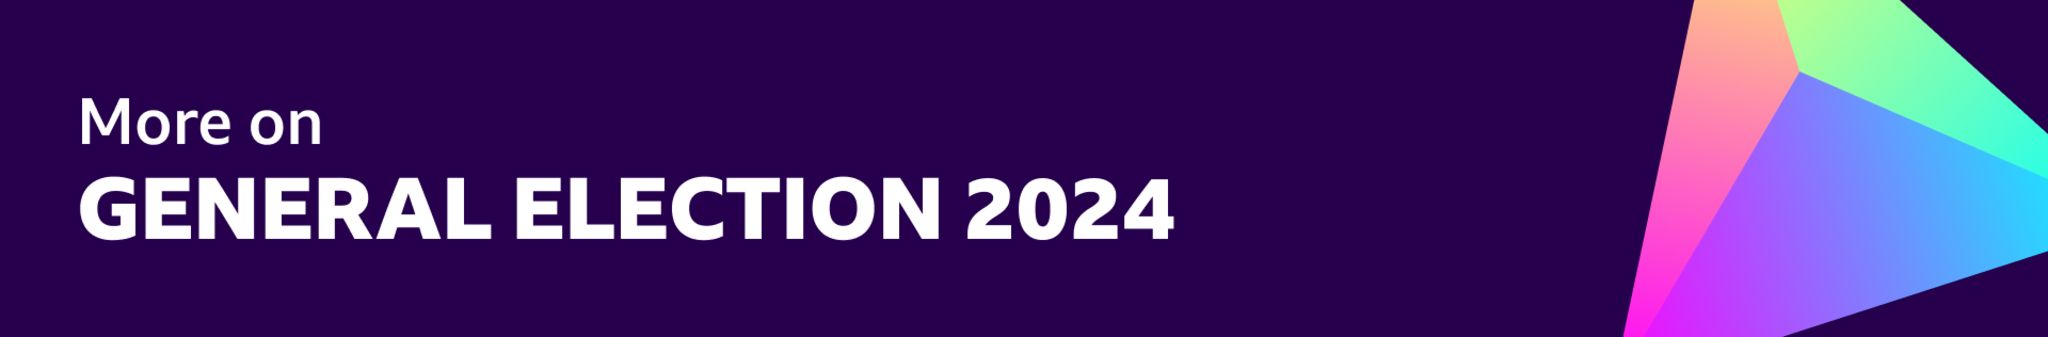 More on general election 2024 graphic